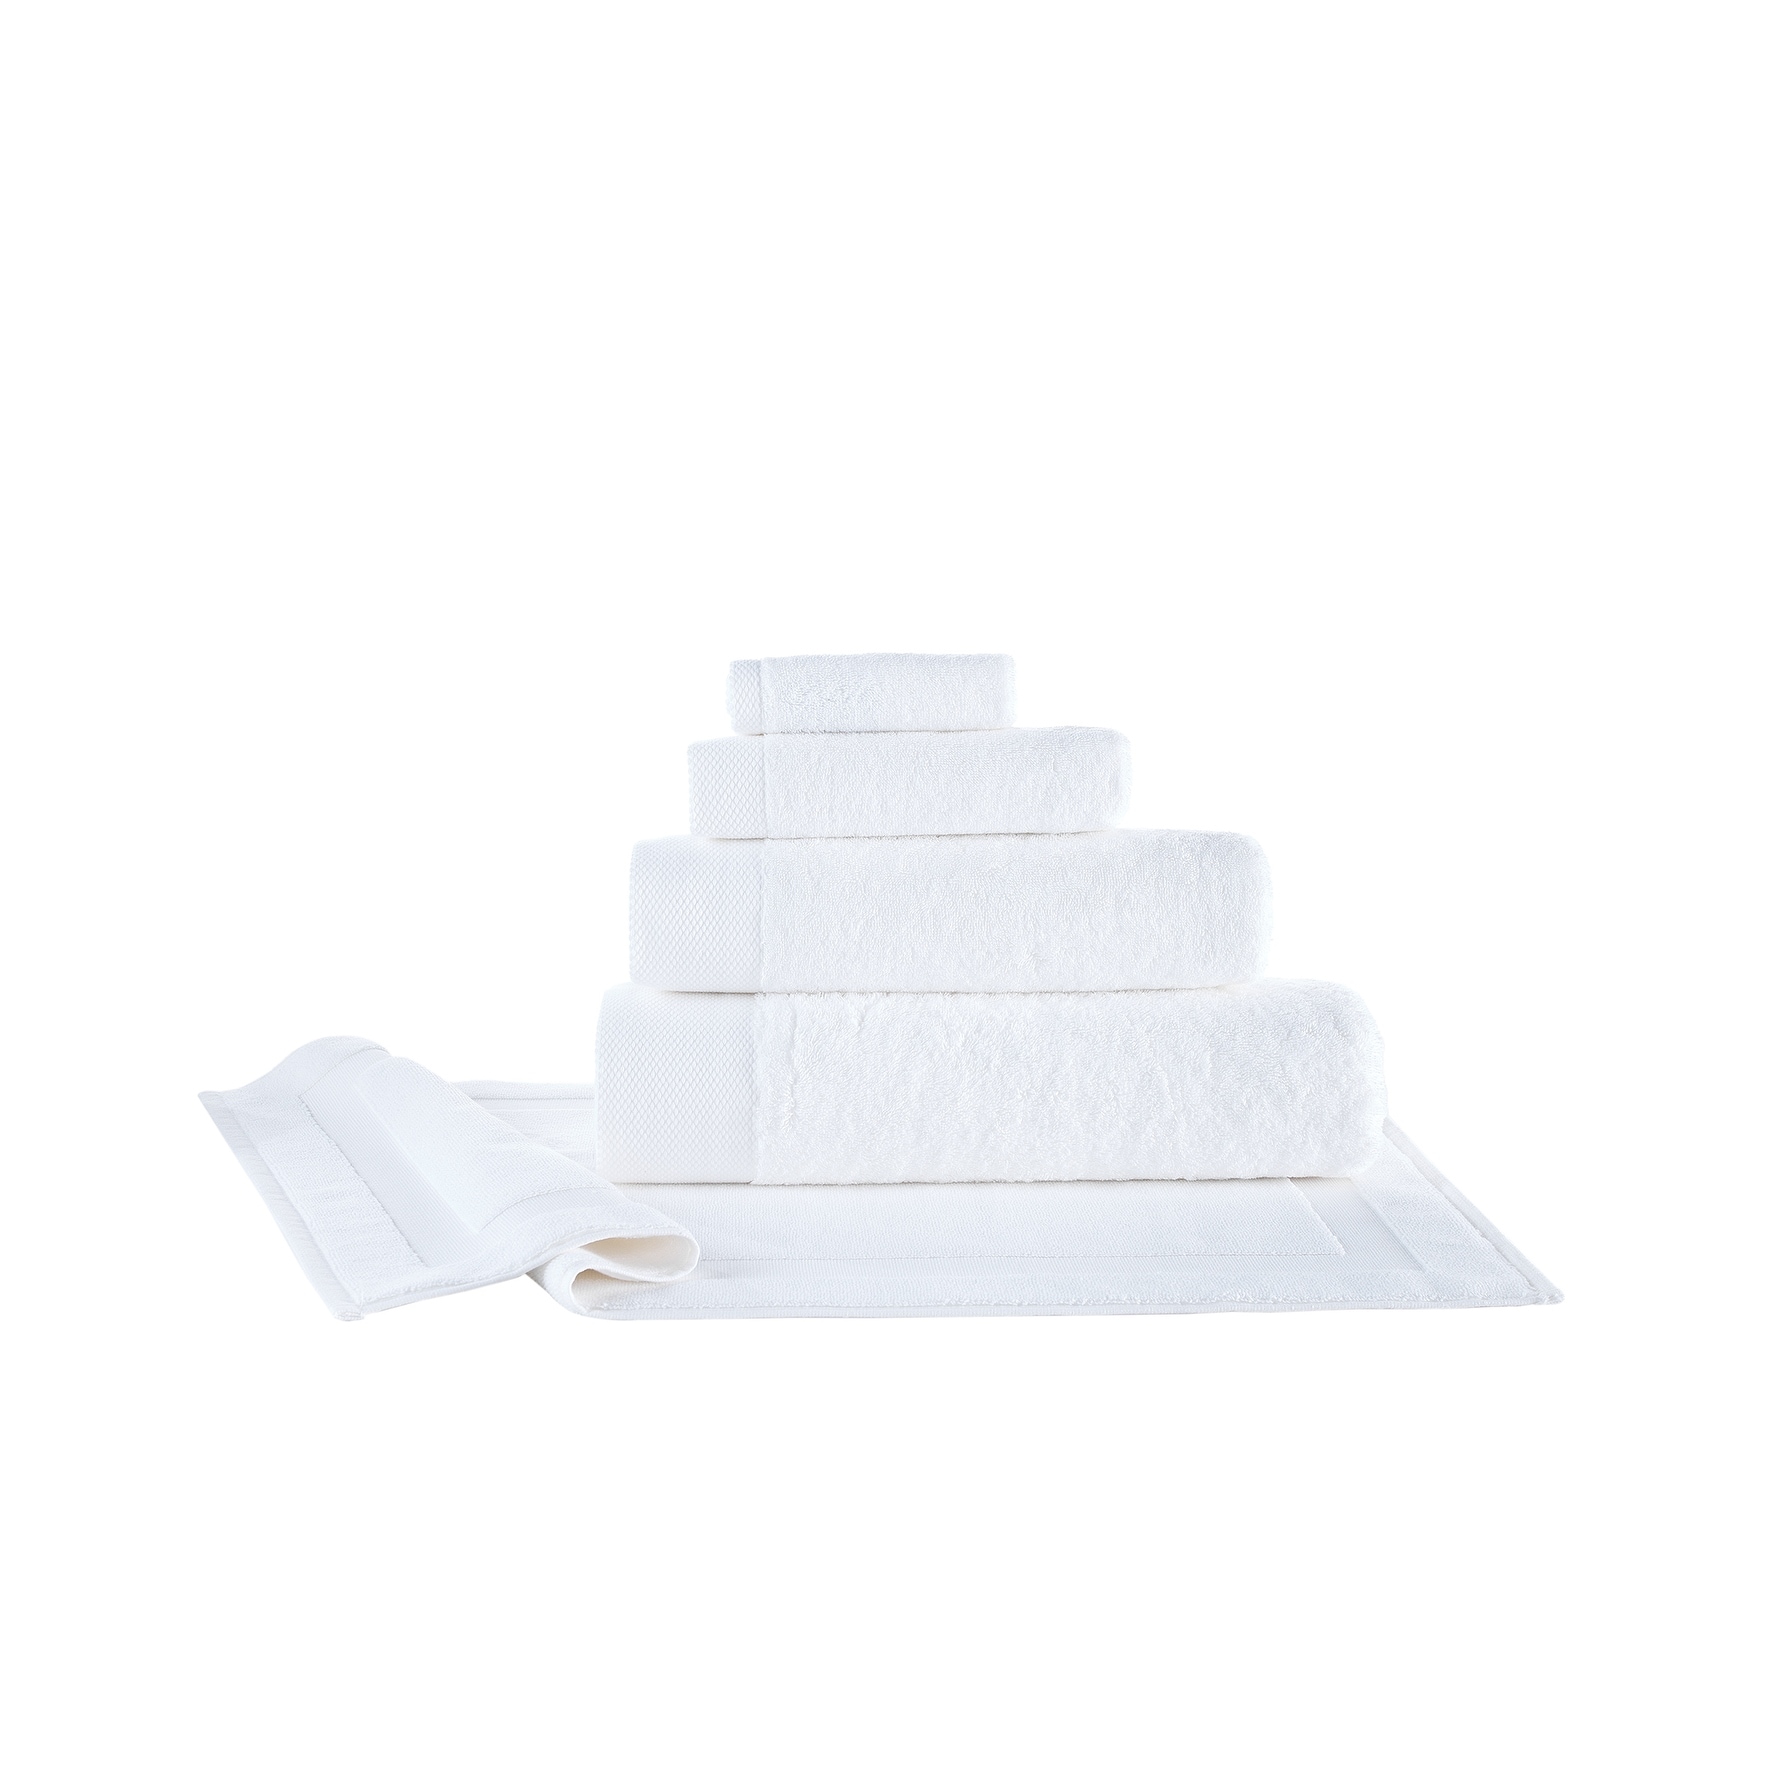 https://ak1.ostkcdn.com/images/products/is/images/direct/7a81db57ae54be3036b4bc65d9724fbf8f0e58c6/Brooks-Brothers-Solid-Signature-6-pcs-Towel-Set.jpg